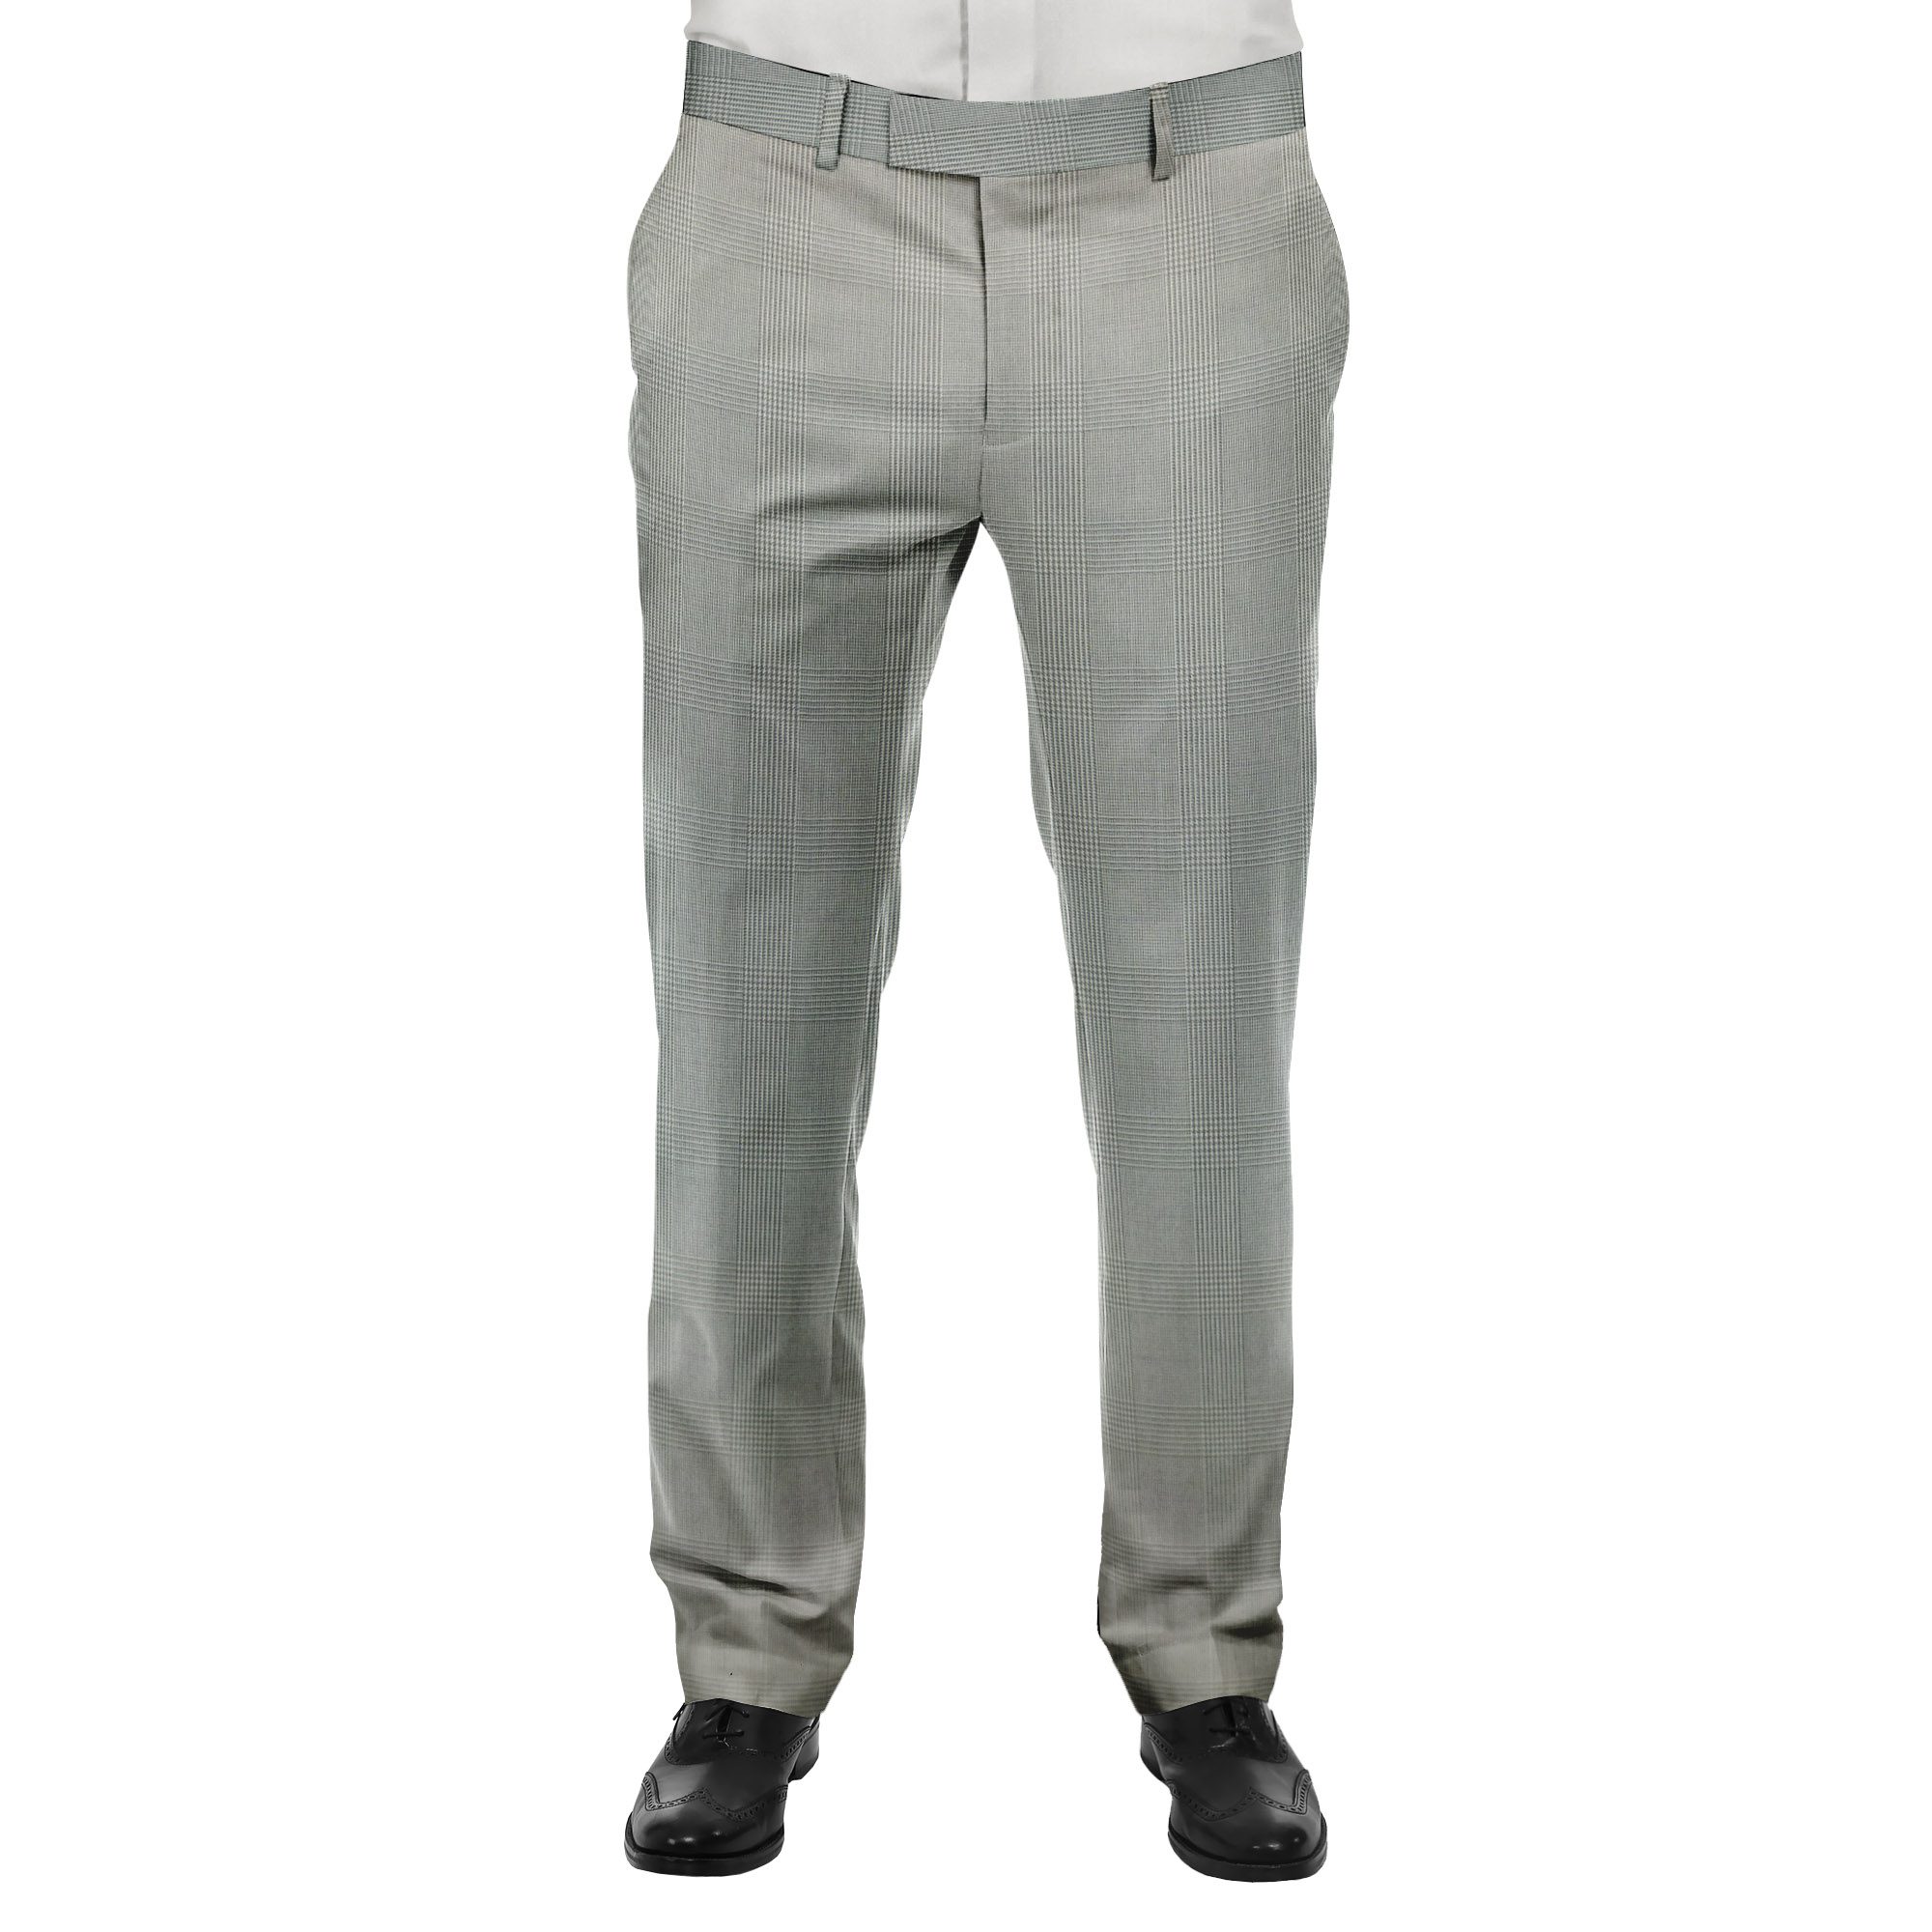 Boden Hampstead Linen Trousers, Navy at John Lewis & Partners